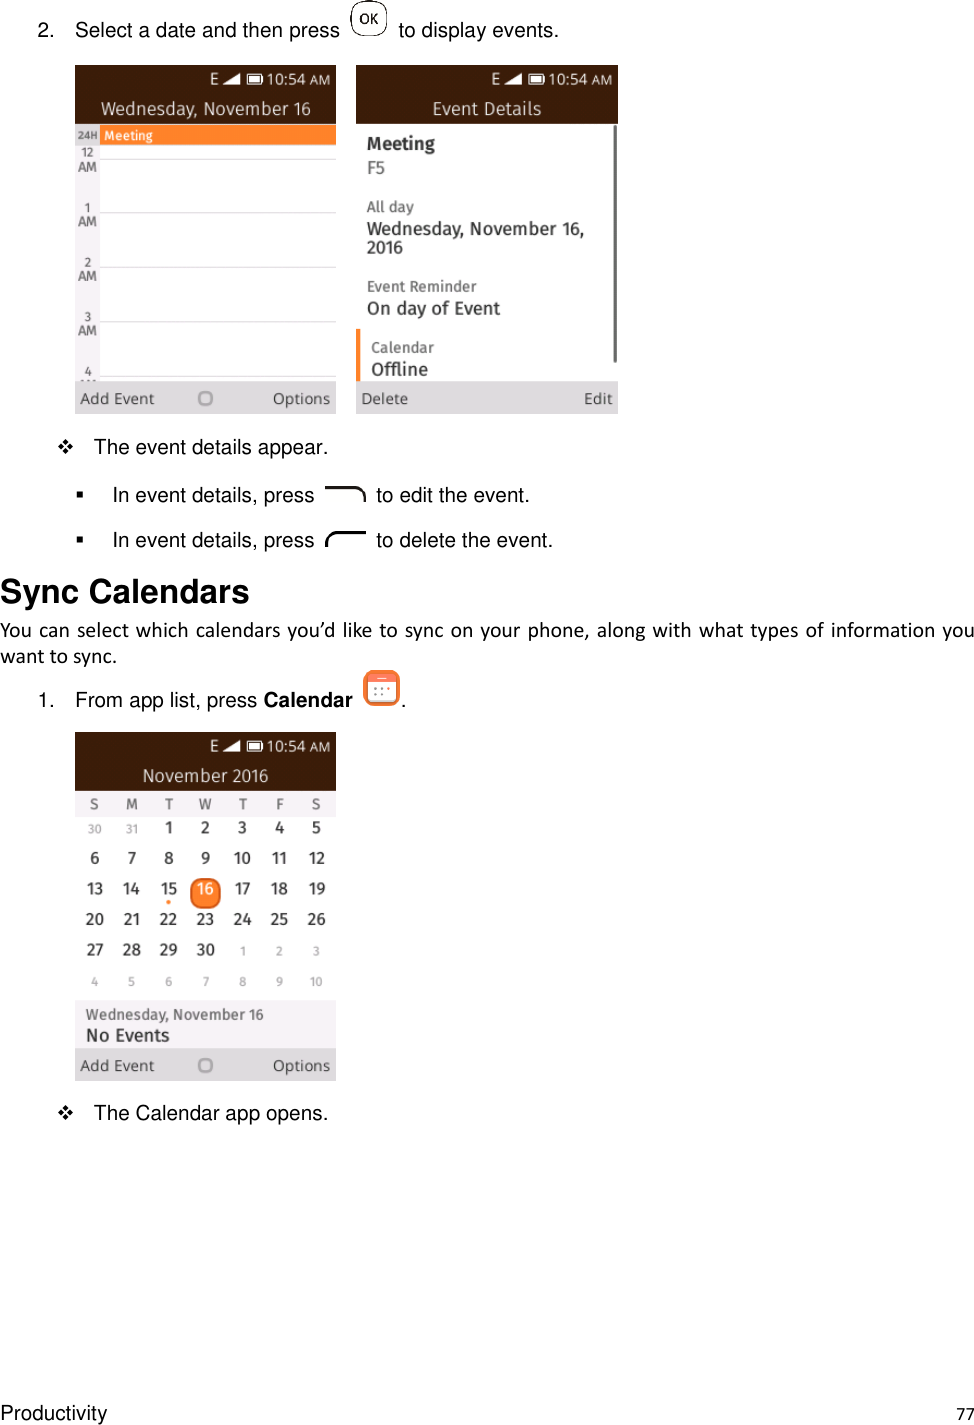 Productivity    77 2.  Select a date and then press    to display events.           The event details appear.   In event details, press    to edit the event.   In event details, press    to delete the event. Sync Calendars You can select which calendars you’d like to sync on your phone, along with what types of information you want to sync. 1.  From app list, press Calendar  .    The Calendar app opens. 